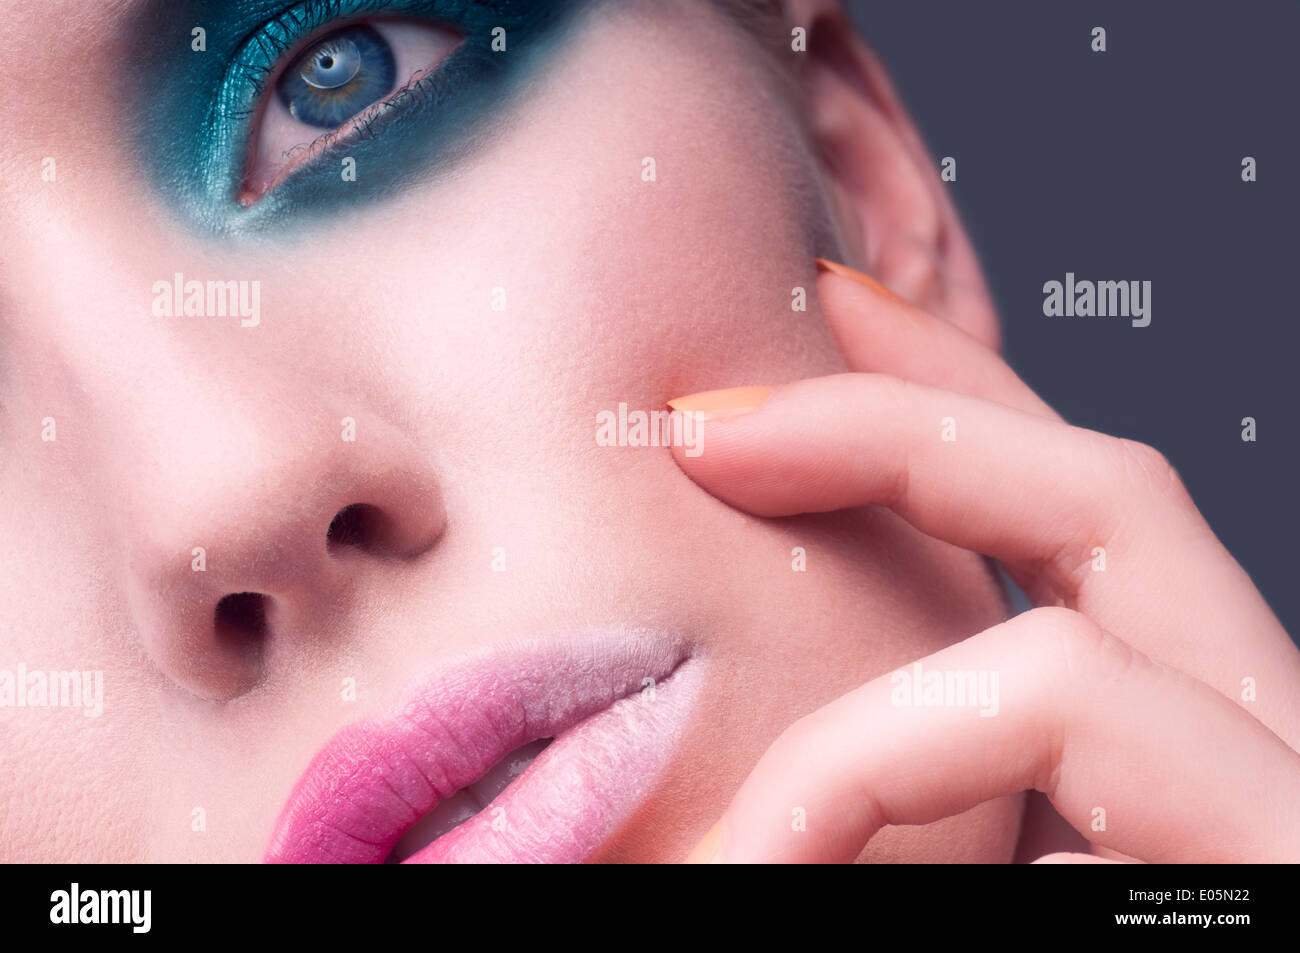 Beauty macro close up of a Caucasian young woman's face with blue eye shadow and pink ombre lips Stock Photo